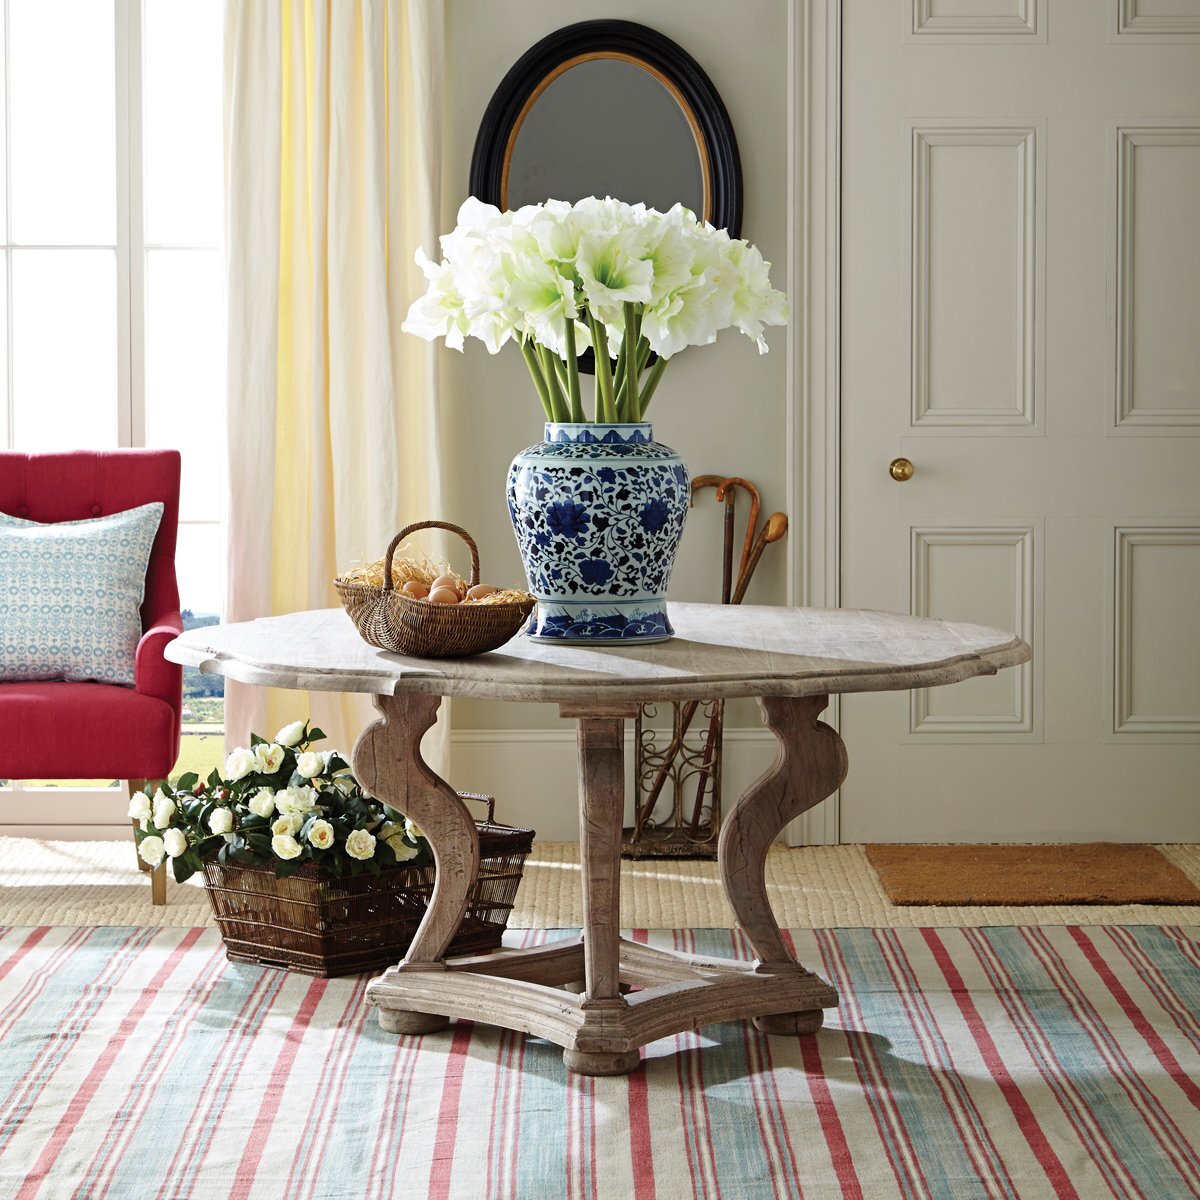 A round table with a large flower-filled vase is always a smart lookCLICK HERE TO SHOP